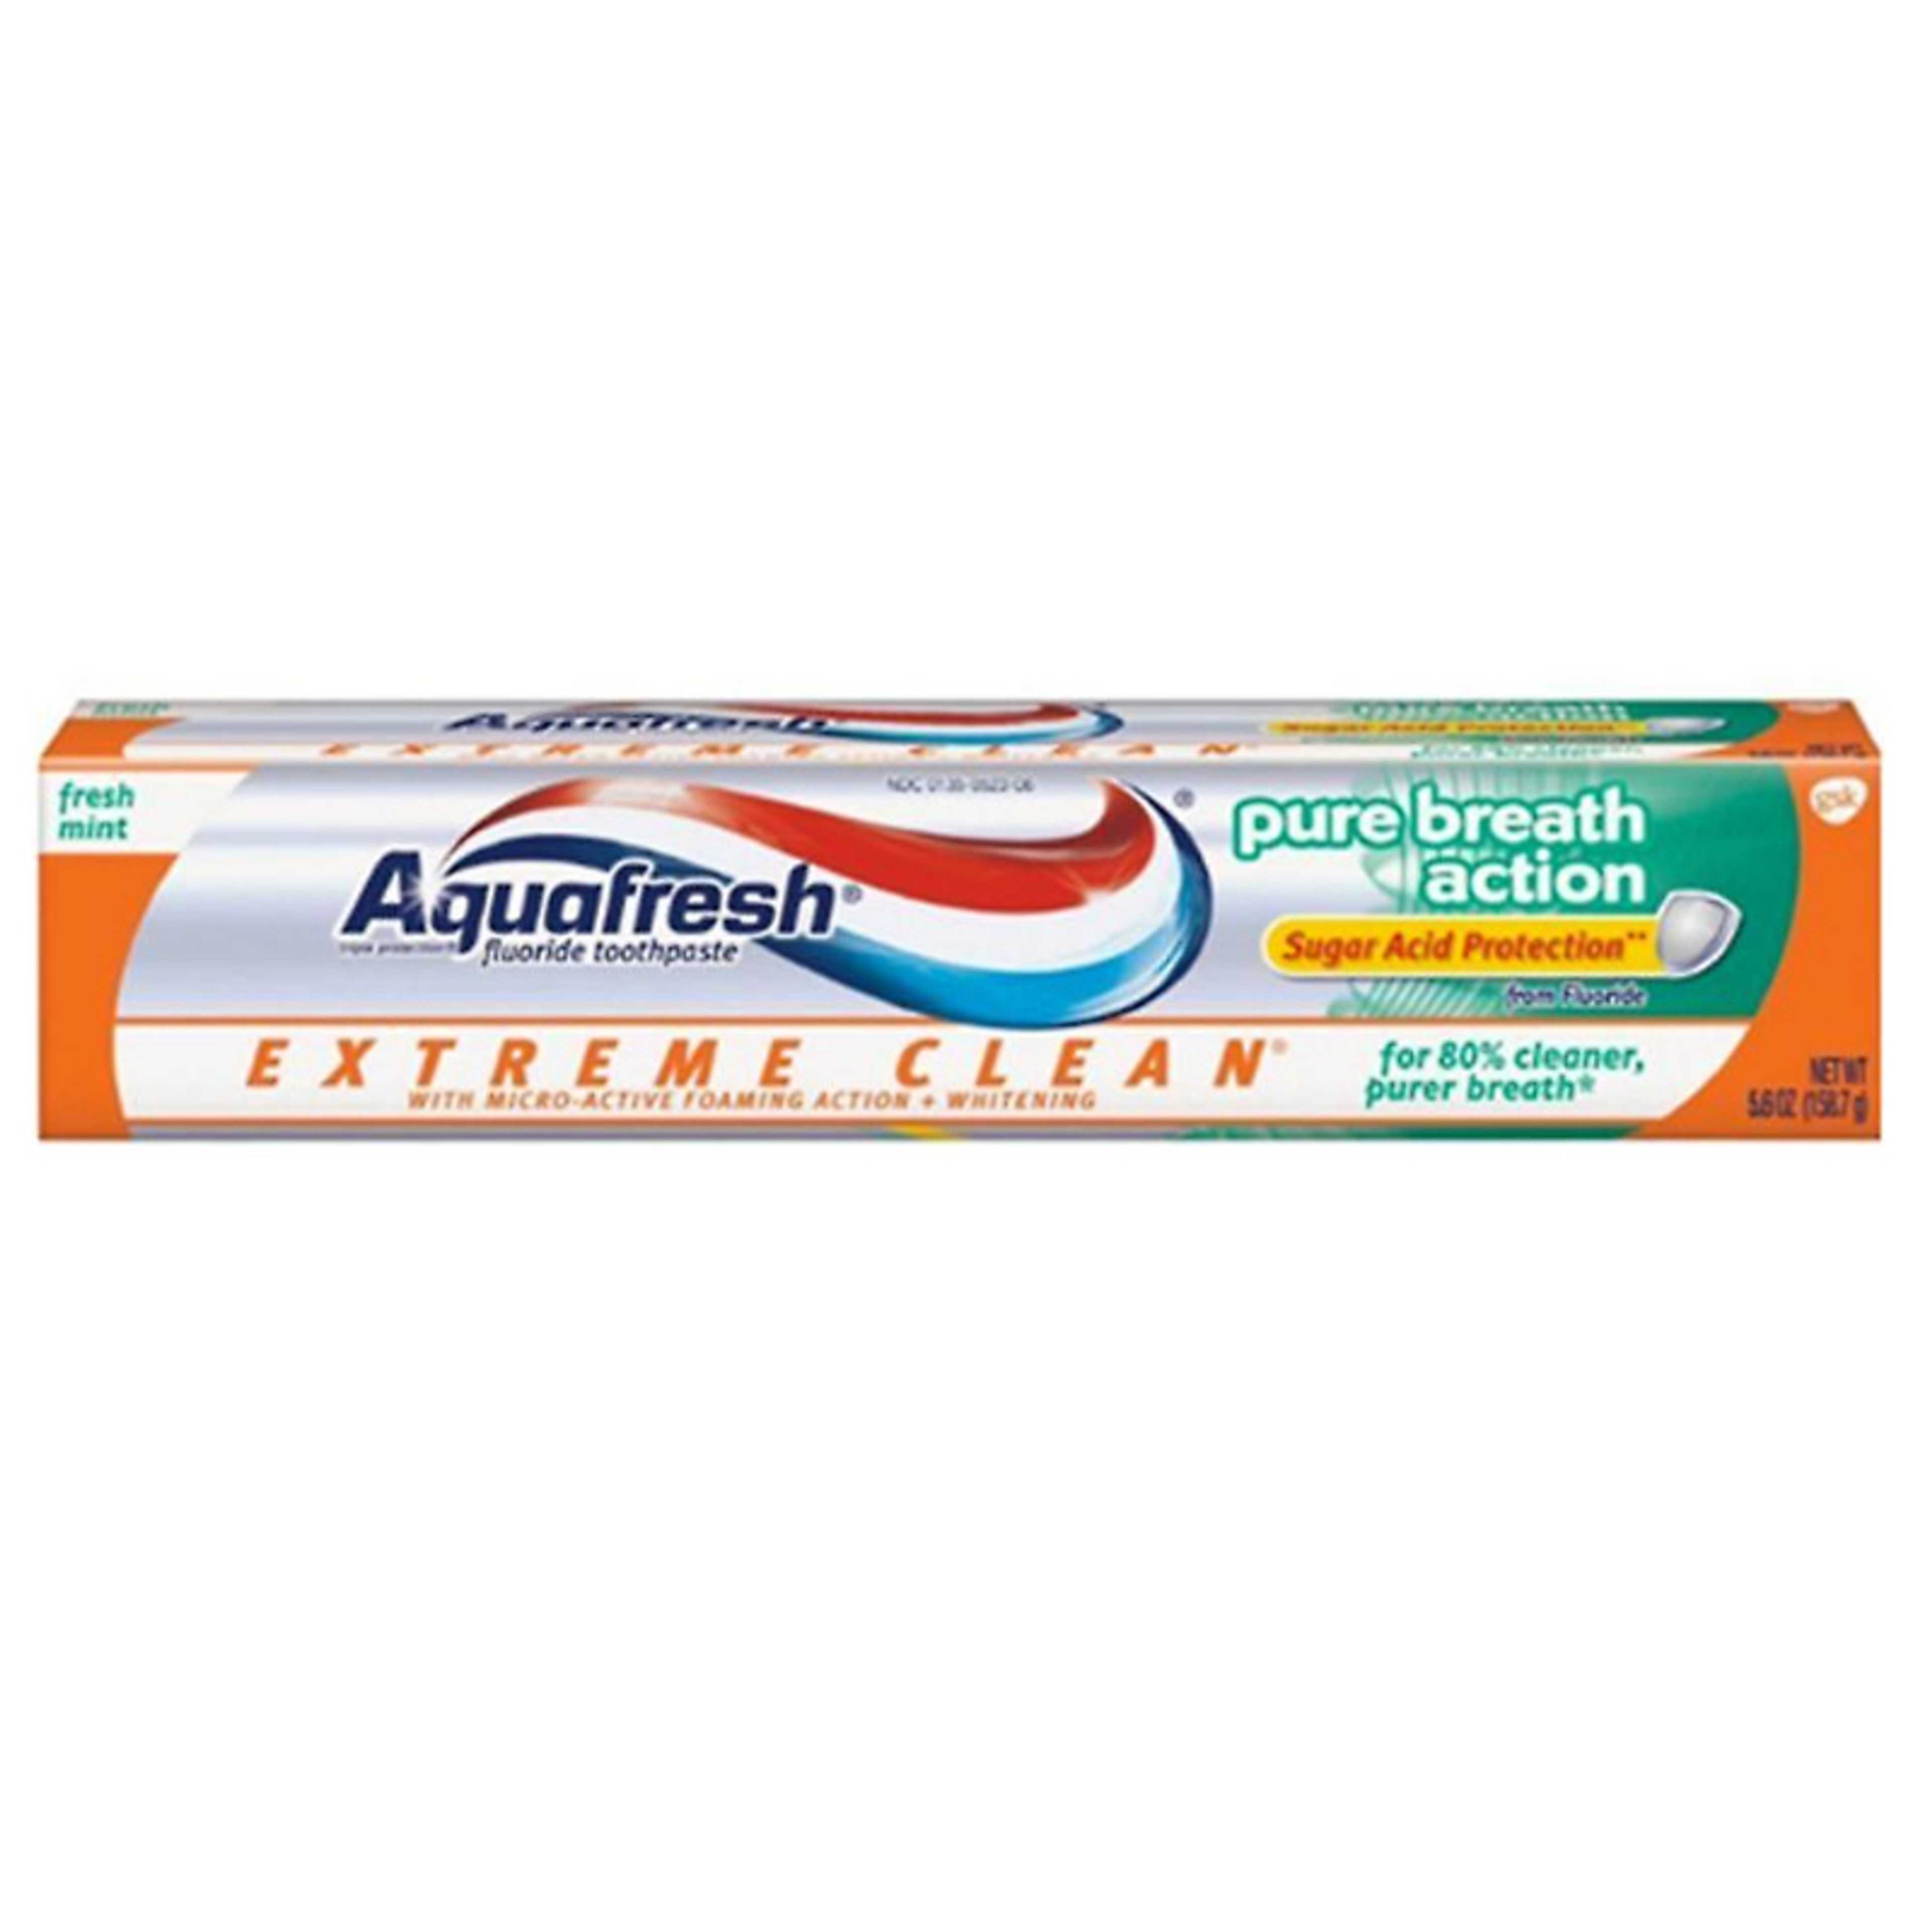 AQUAFRESH TOOTH PASTE PURE BREATH ACTION EXTREME CLEAN FRESH MINT 158.8G (USA Imported)